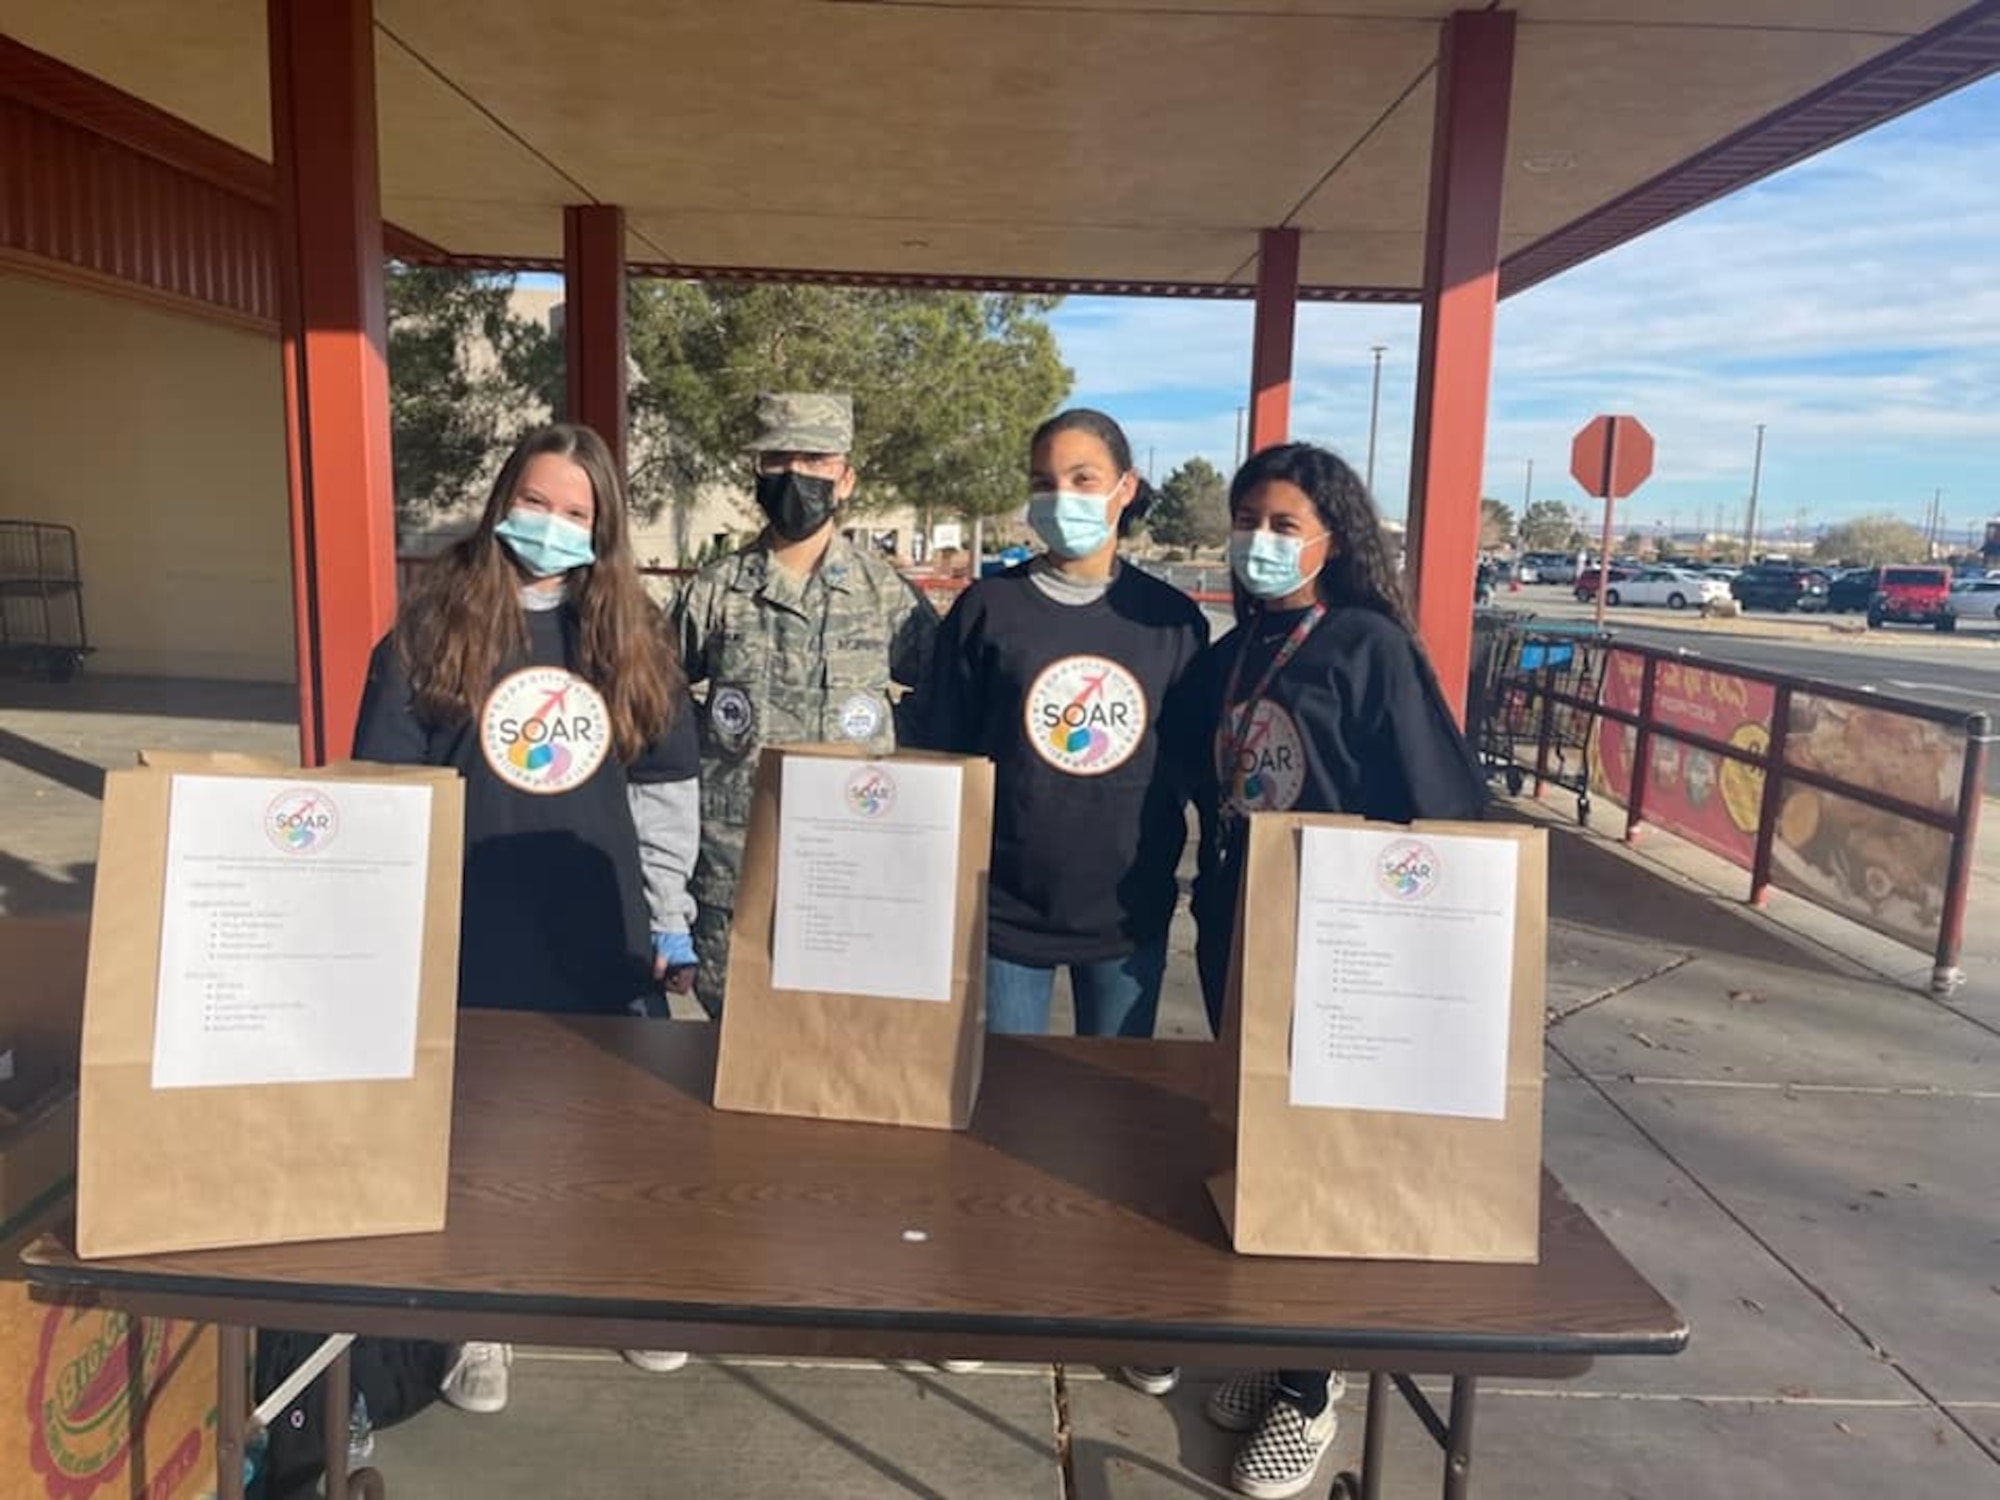 SOAR members sponsored local food drive that supported young Airmen in the dorms and a non-profit food bank in the surrounding community to the base.